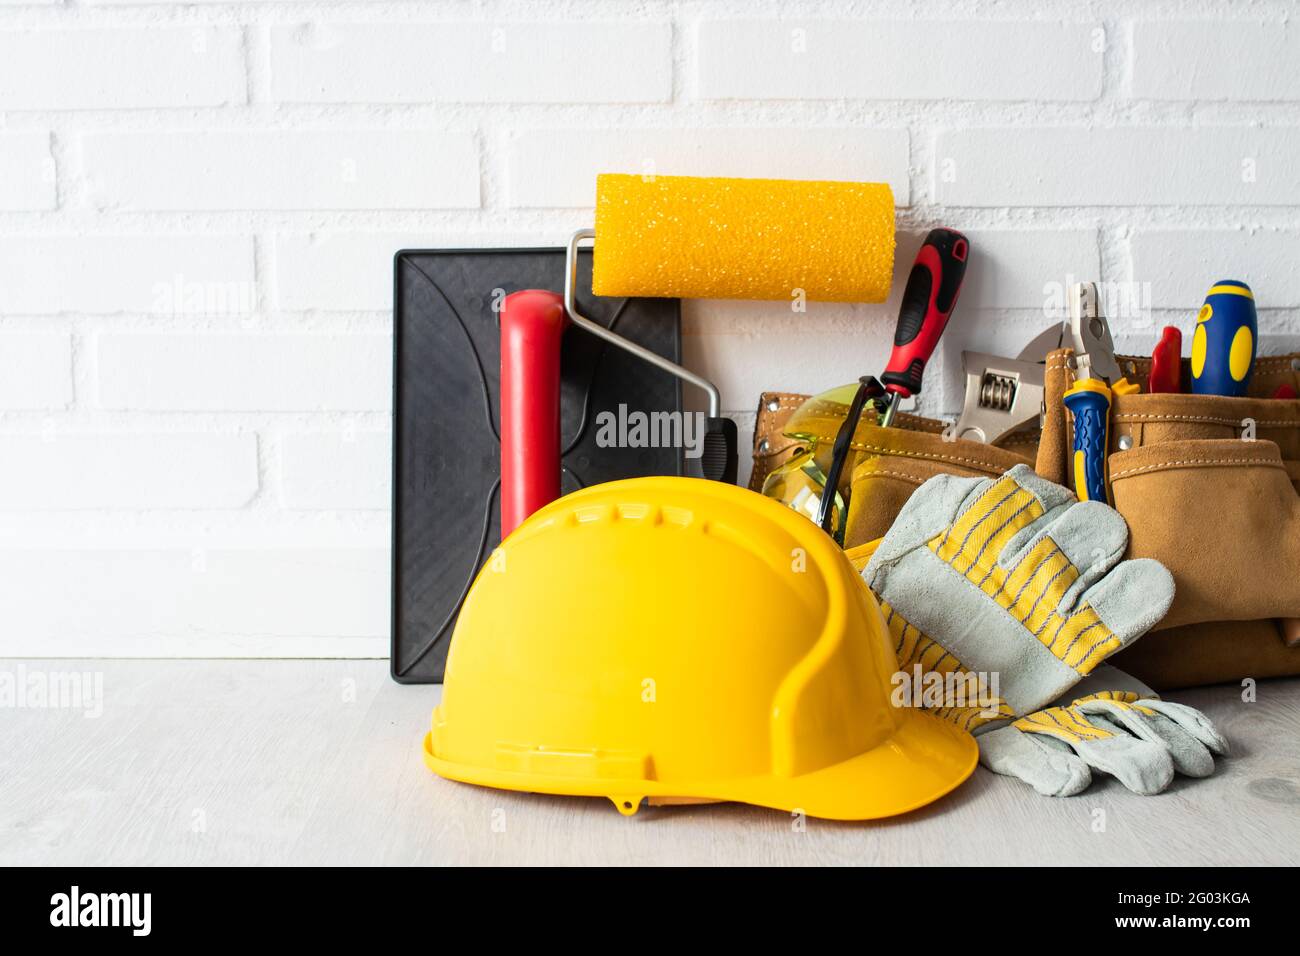 construction worker helmet with tools Stock Photo